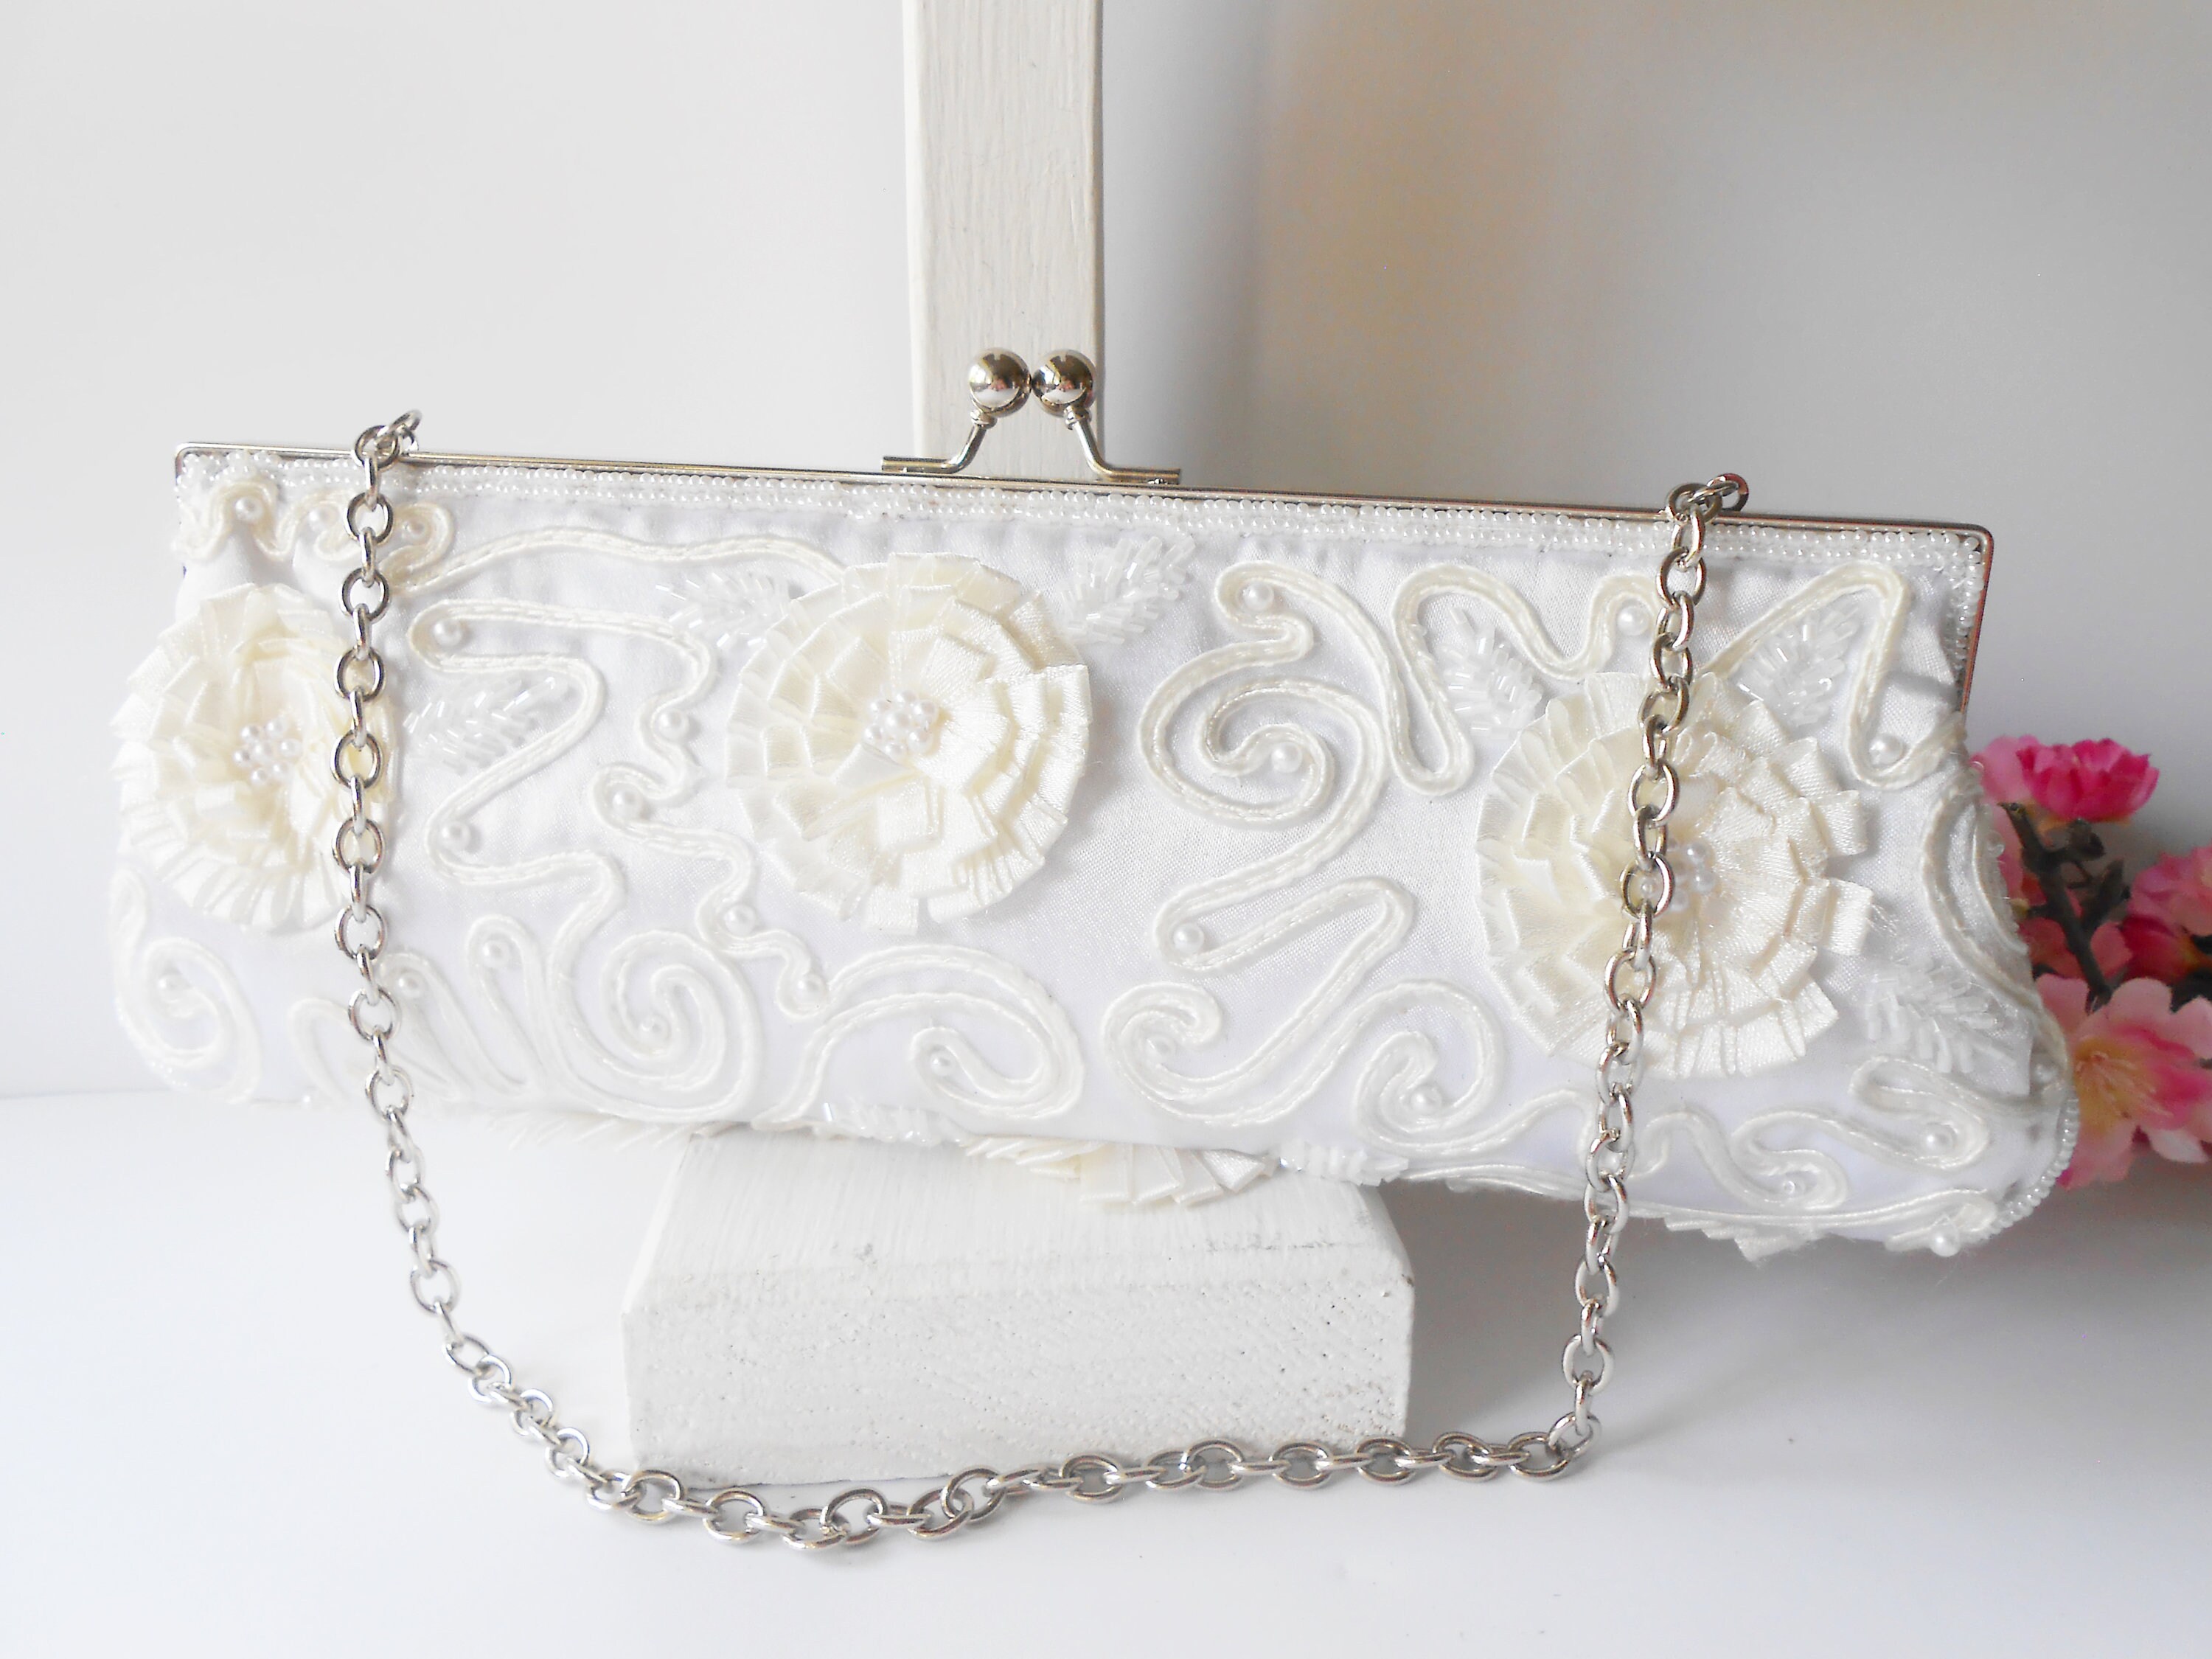 Louis Vuitton - Authenticated Kirigami Clutch Bag - Cloth White Floral for Women, Never Worn, with Tag